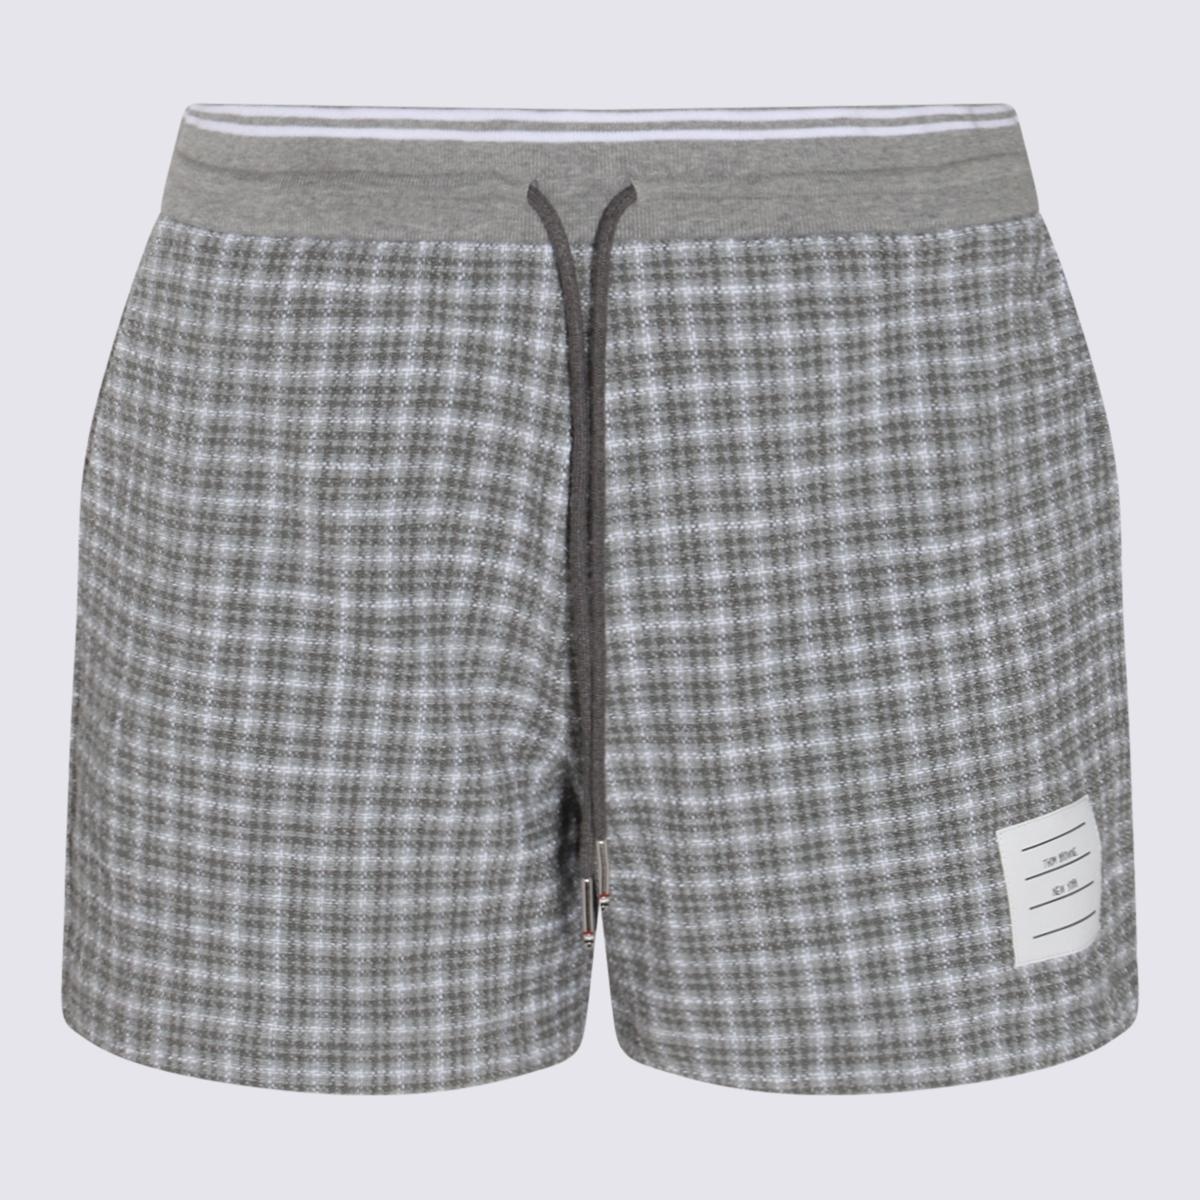 THOM BROWNE GREY AND WHITE COTTON BLEND SHORTS - 1